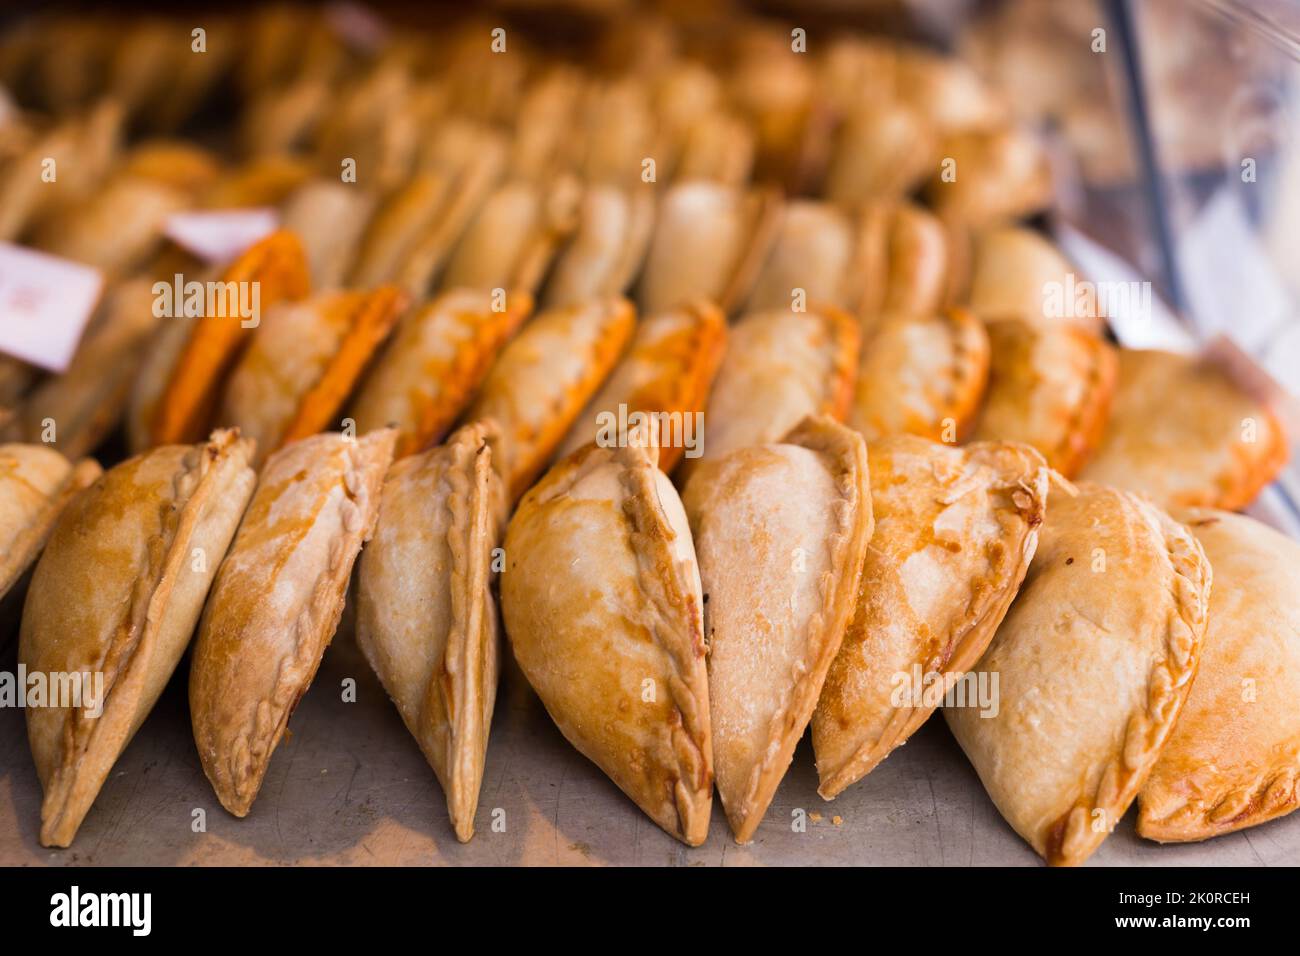 freshly baked empanadas with different fillings for sale Stock Photo